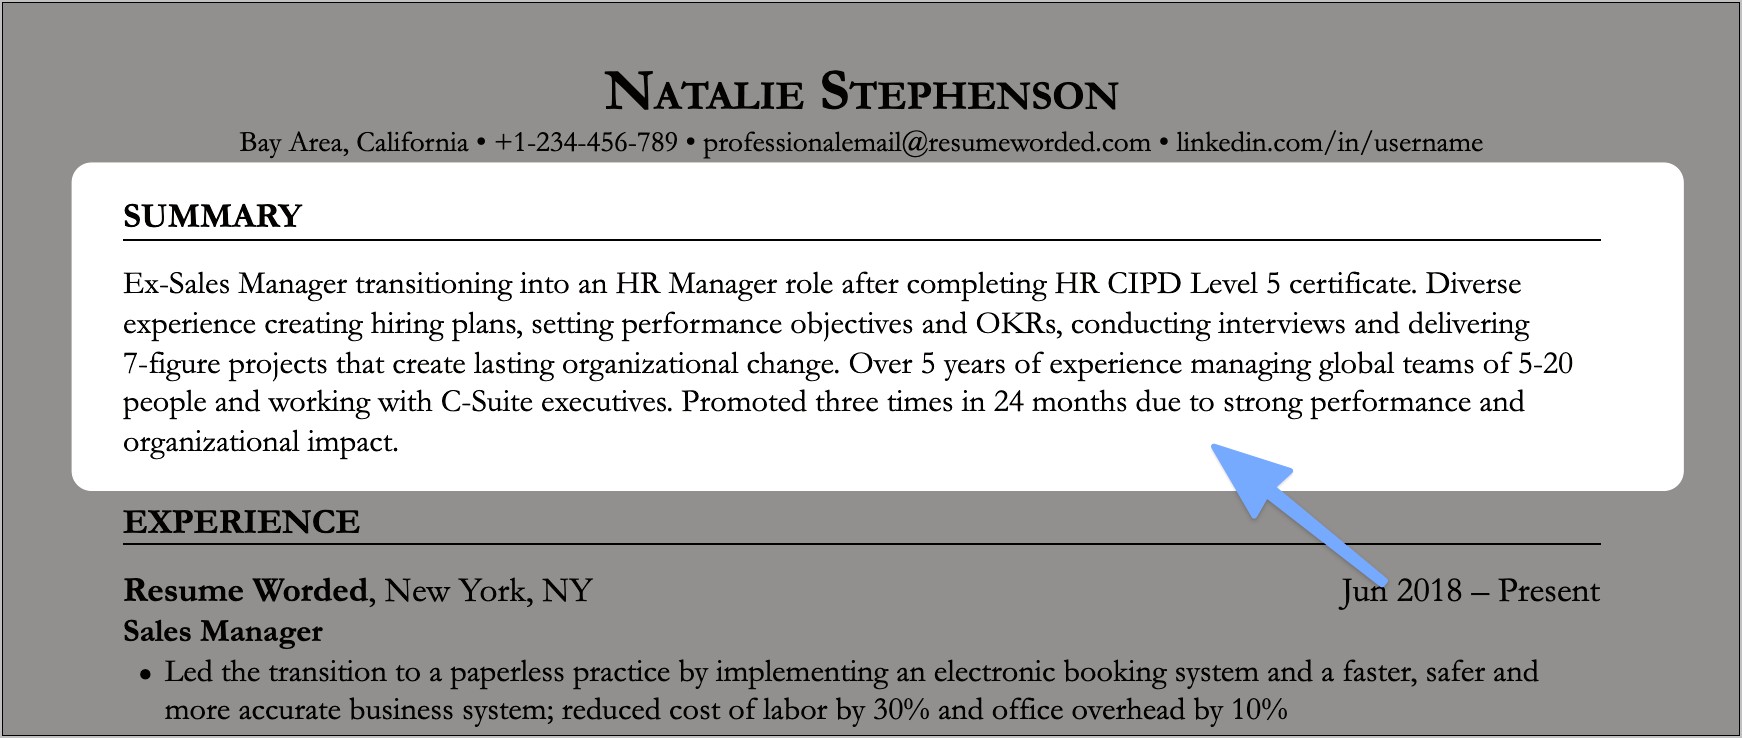 Experience Resume Opening Statement Examples